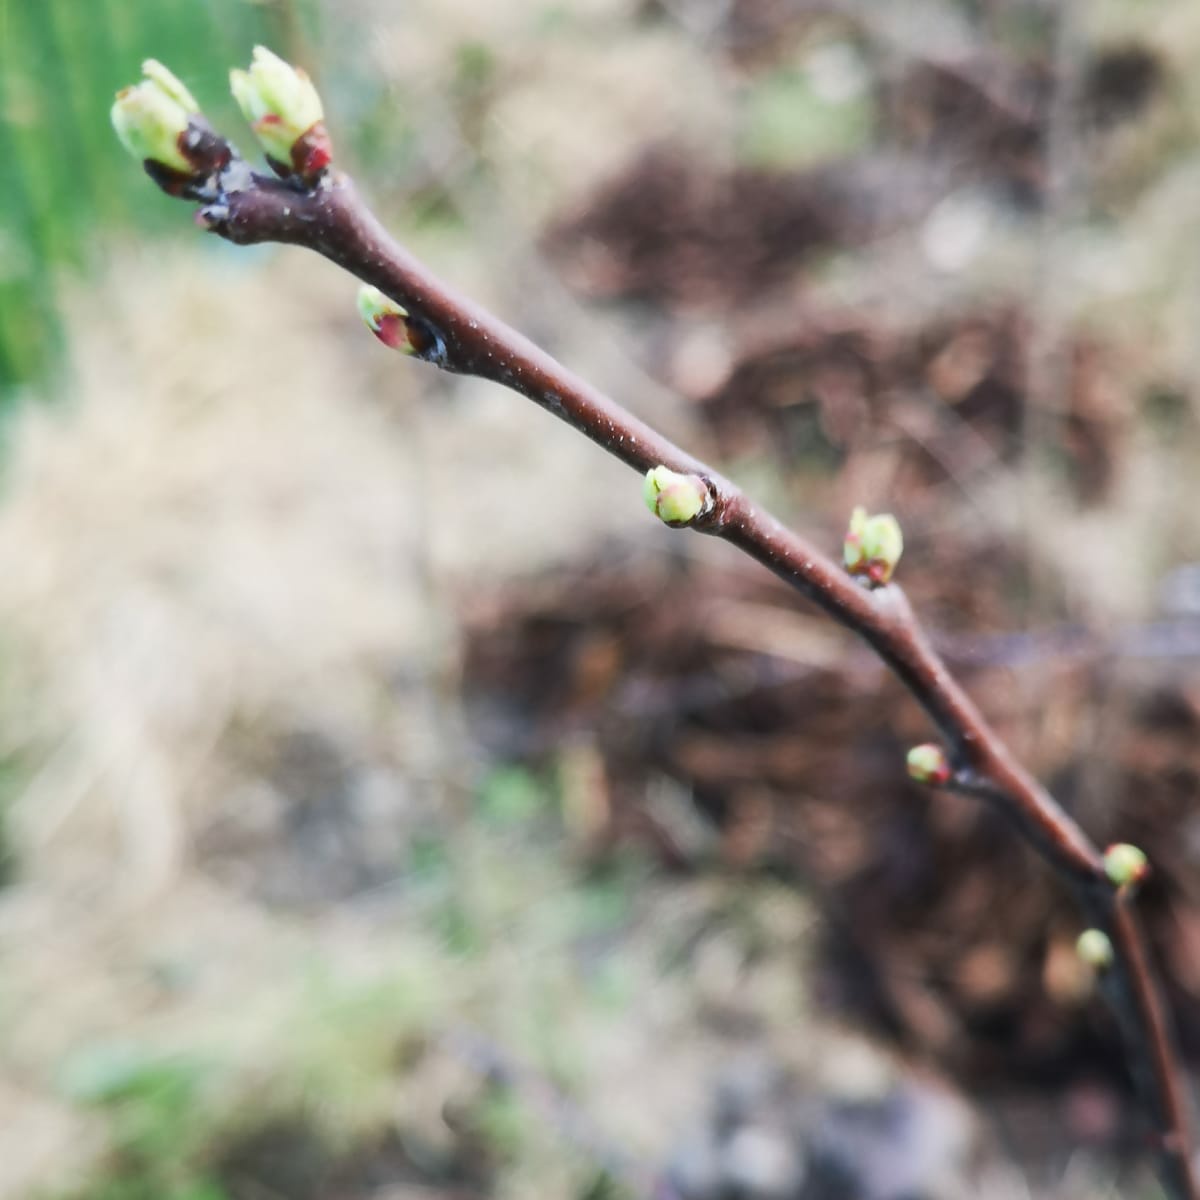 Nothing better! Seeing the trees you've planted coming into leaf 😊 @Keep_Wales_Tidy @WGEnviroAgri #wellconnected  #NationalForestWales #Tree #SignsofSpring #spring @conwy_kwt @kwt_denbighshir